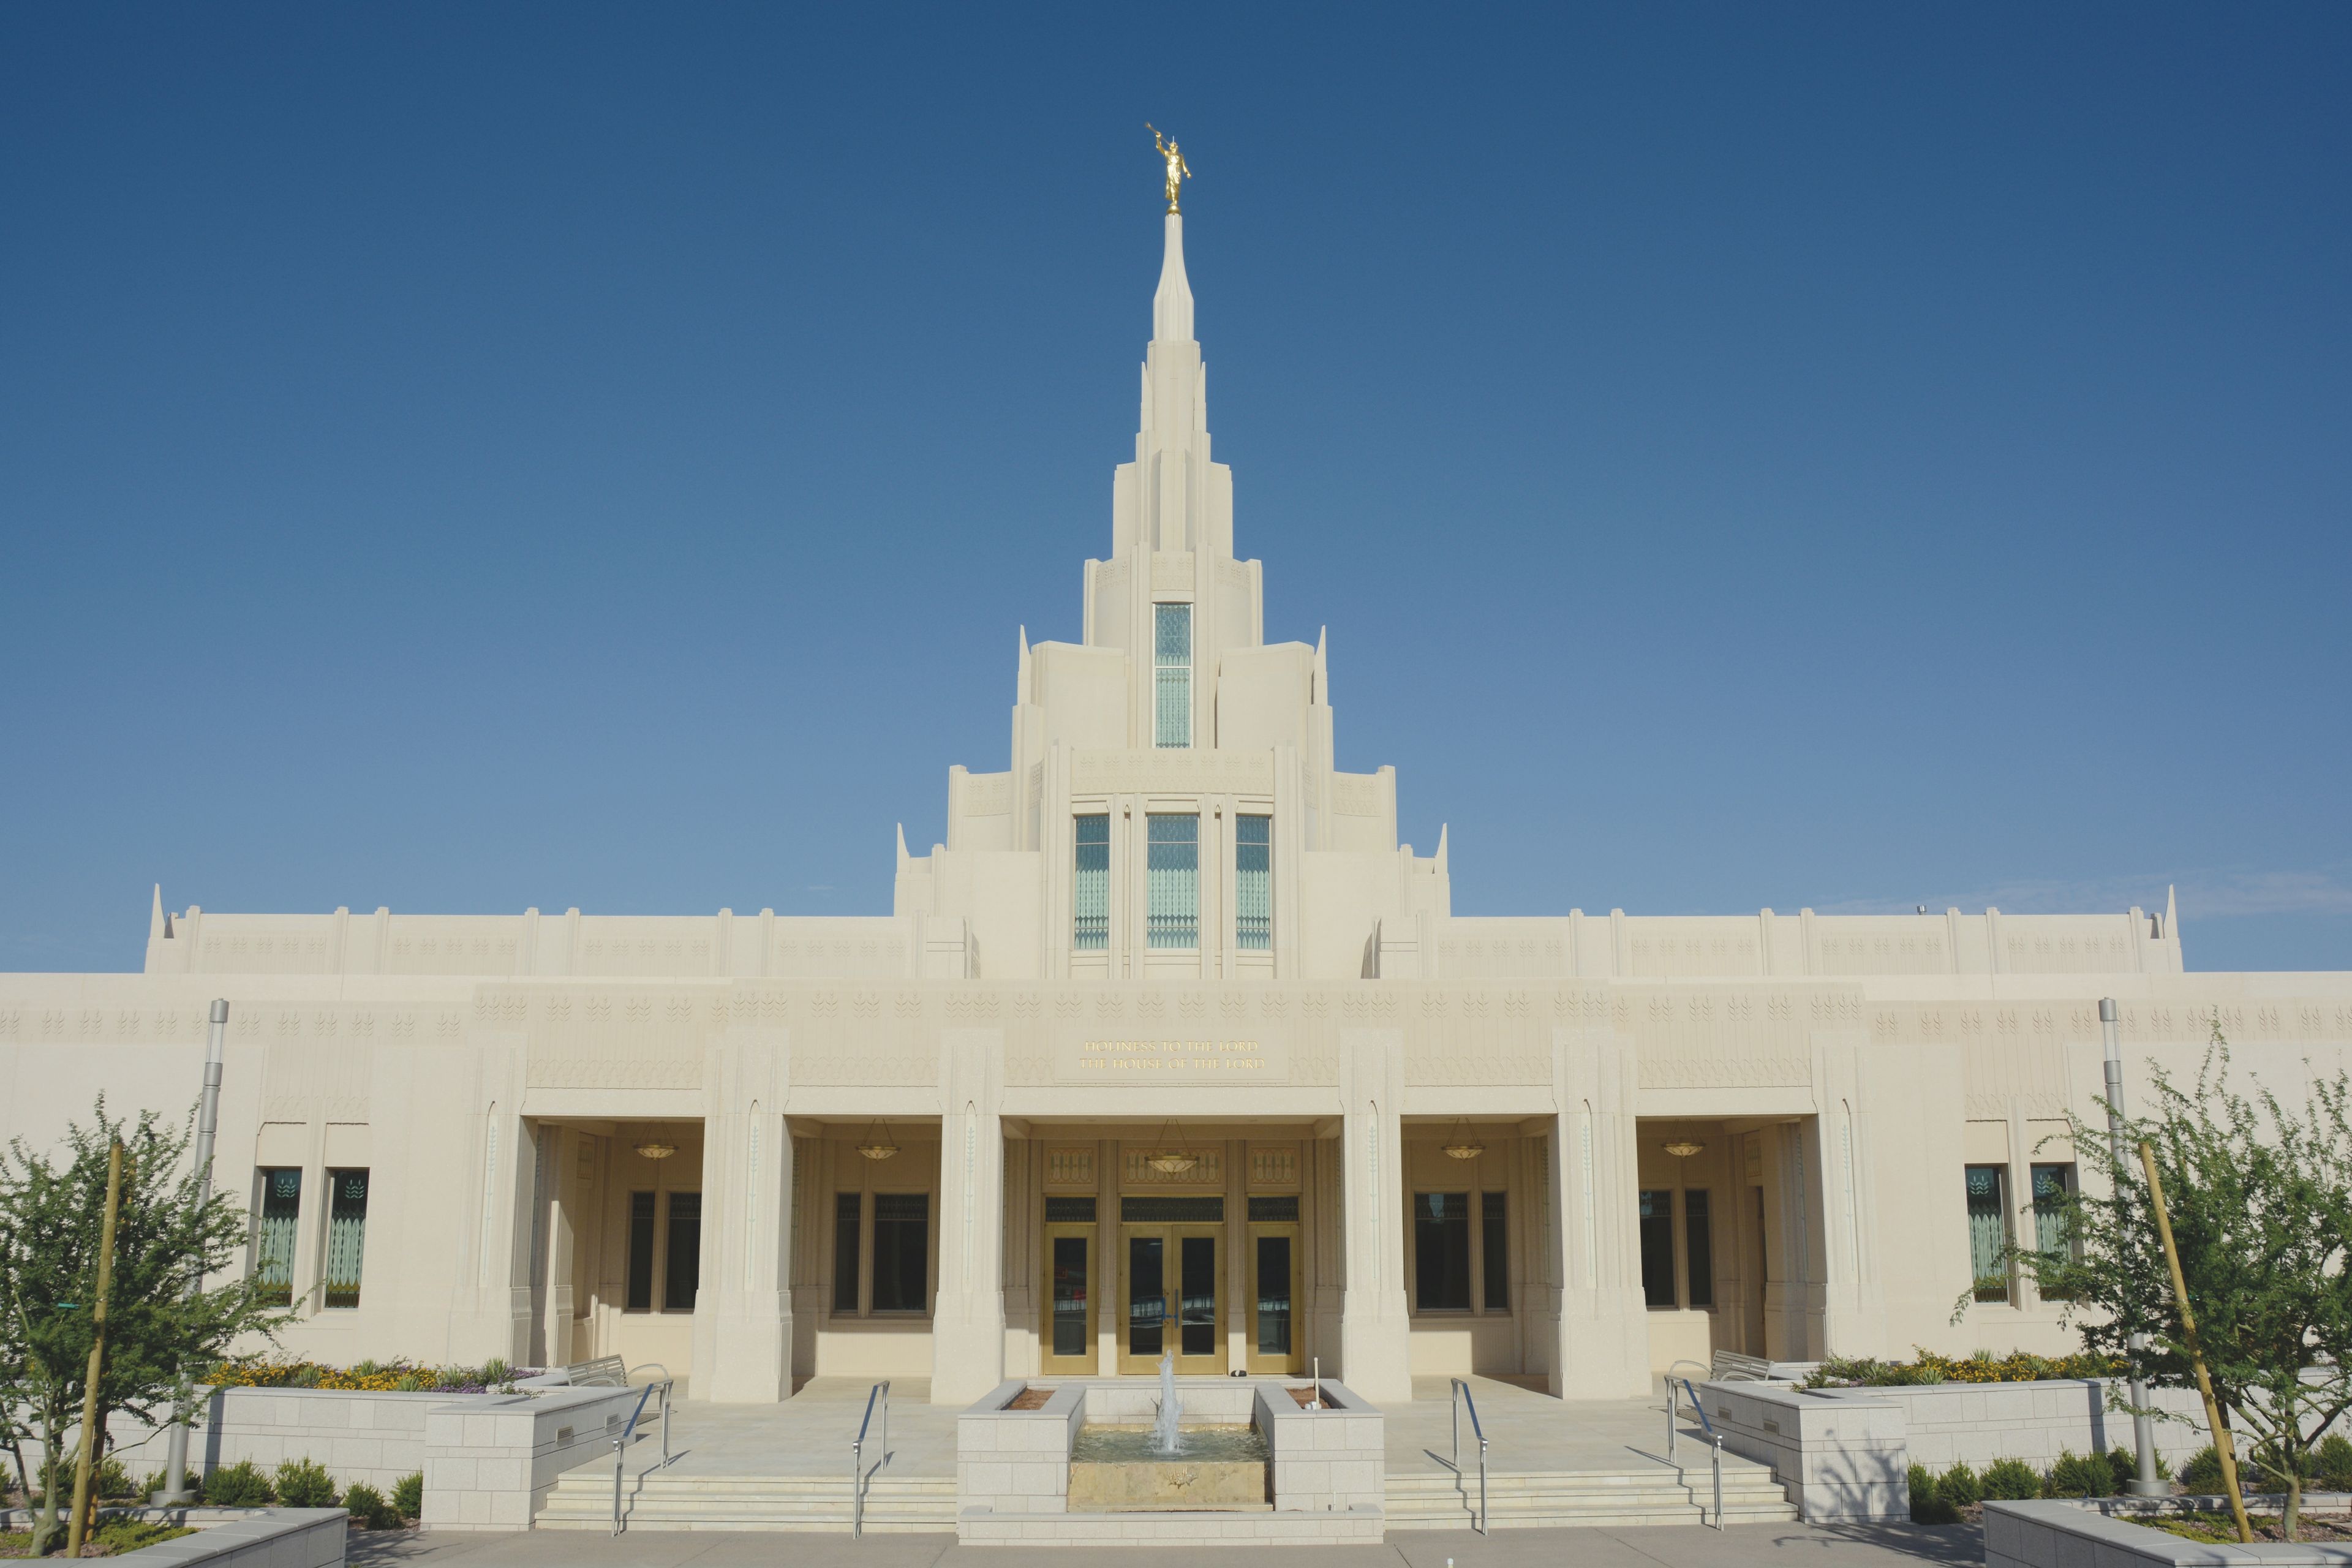 A view of the entrance of the Phoenix Arizona Temple during the day.